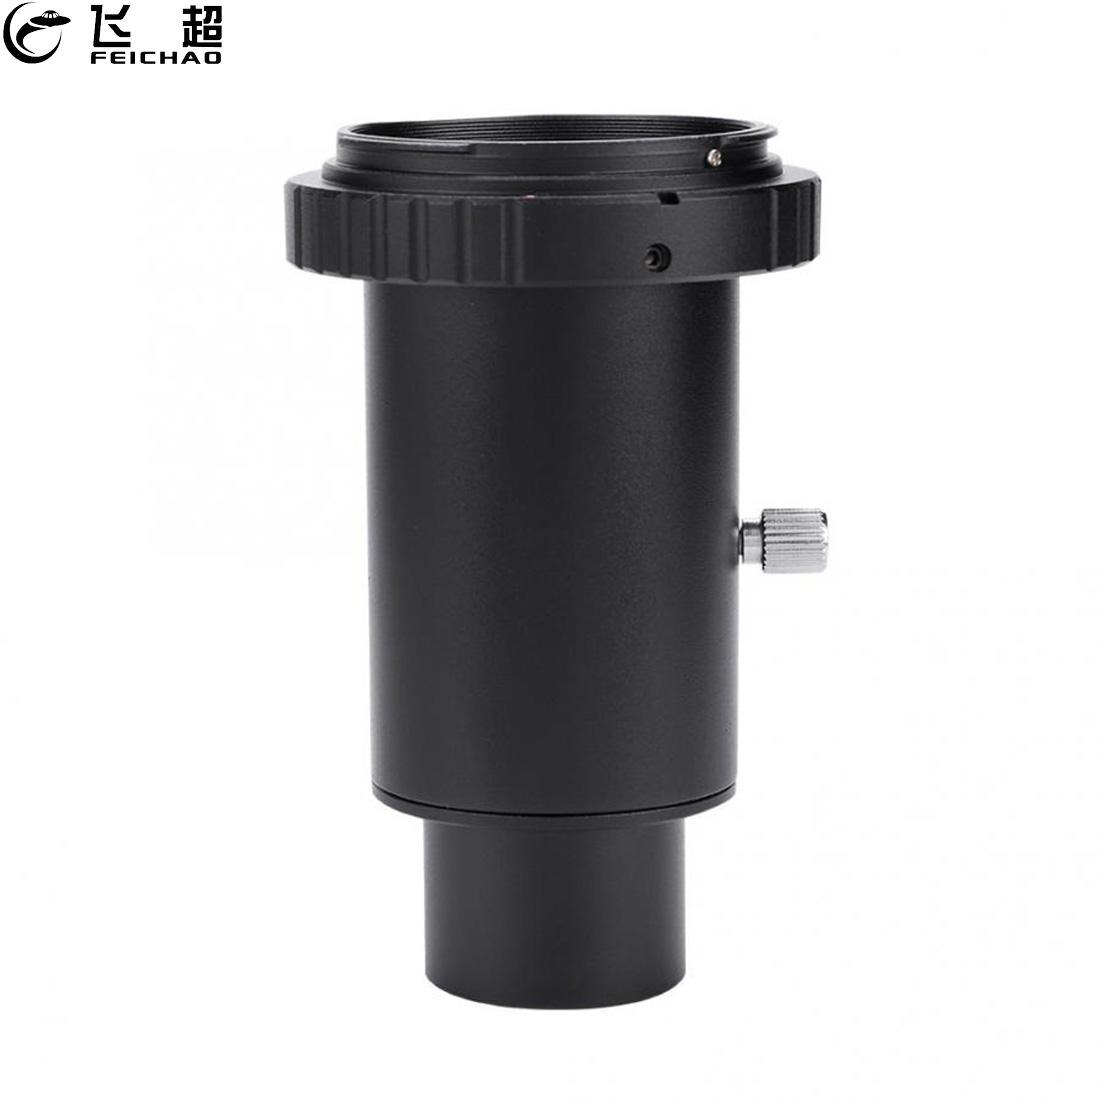 FEICHAO Telescope Camera Adapter Metal T2 Ring 1.25 inch Extension Tube M42 Thread T-Mount Lens Adapter for Canon Nikon DSLR Monocular